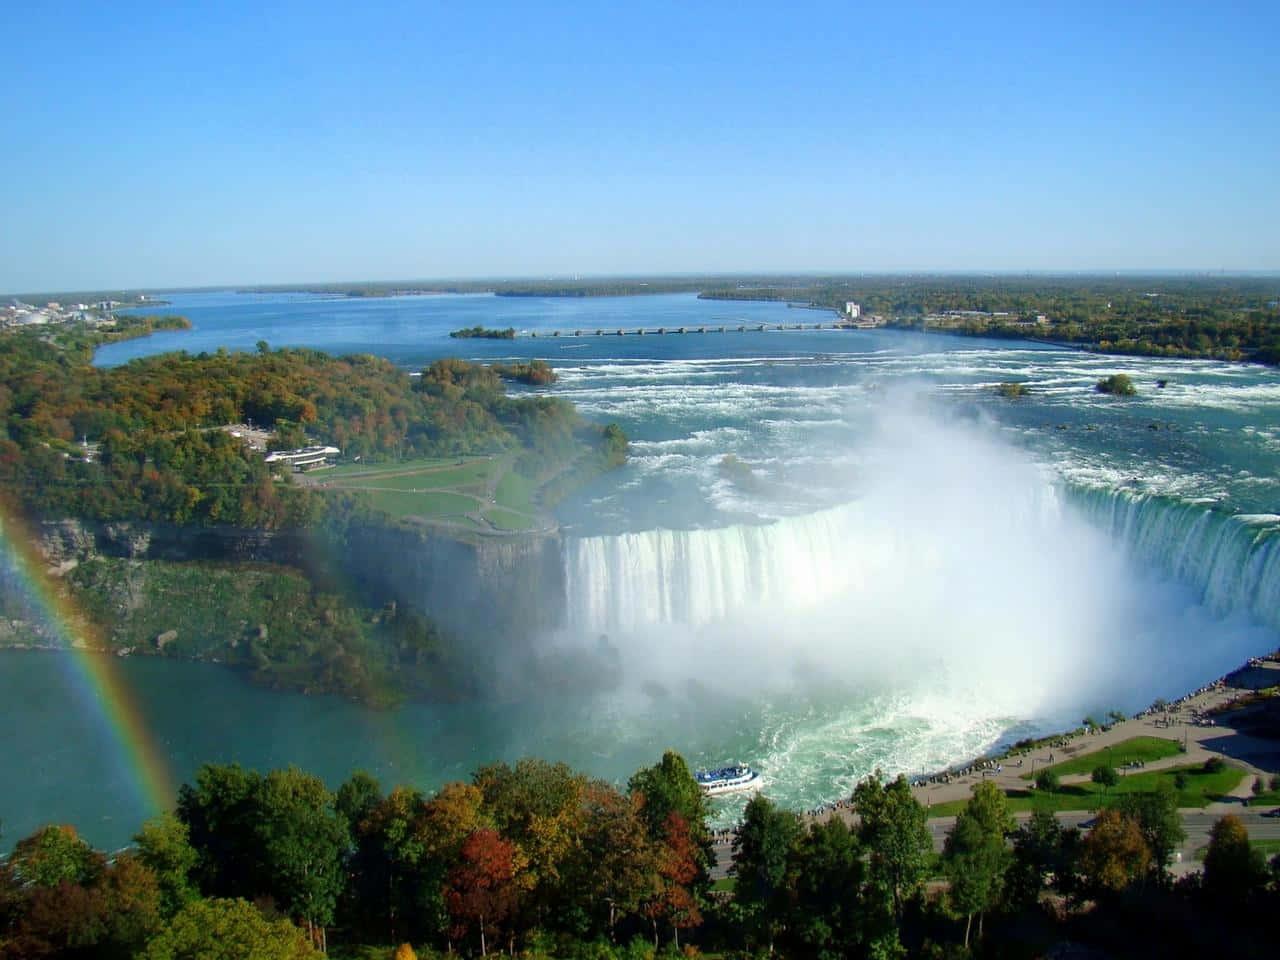 Enjoy the Beauty and Relaxing Atmosphere at the Magnificent 720p Niagara Falls.